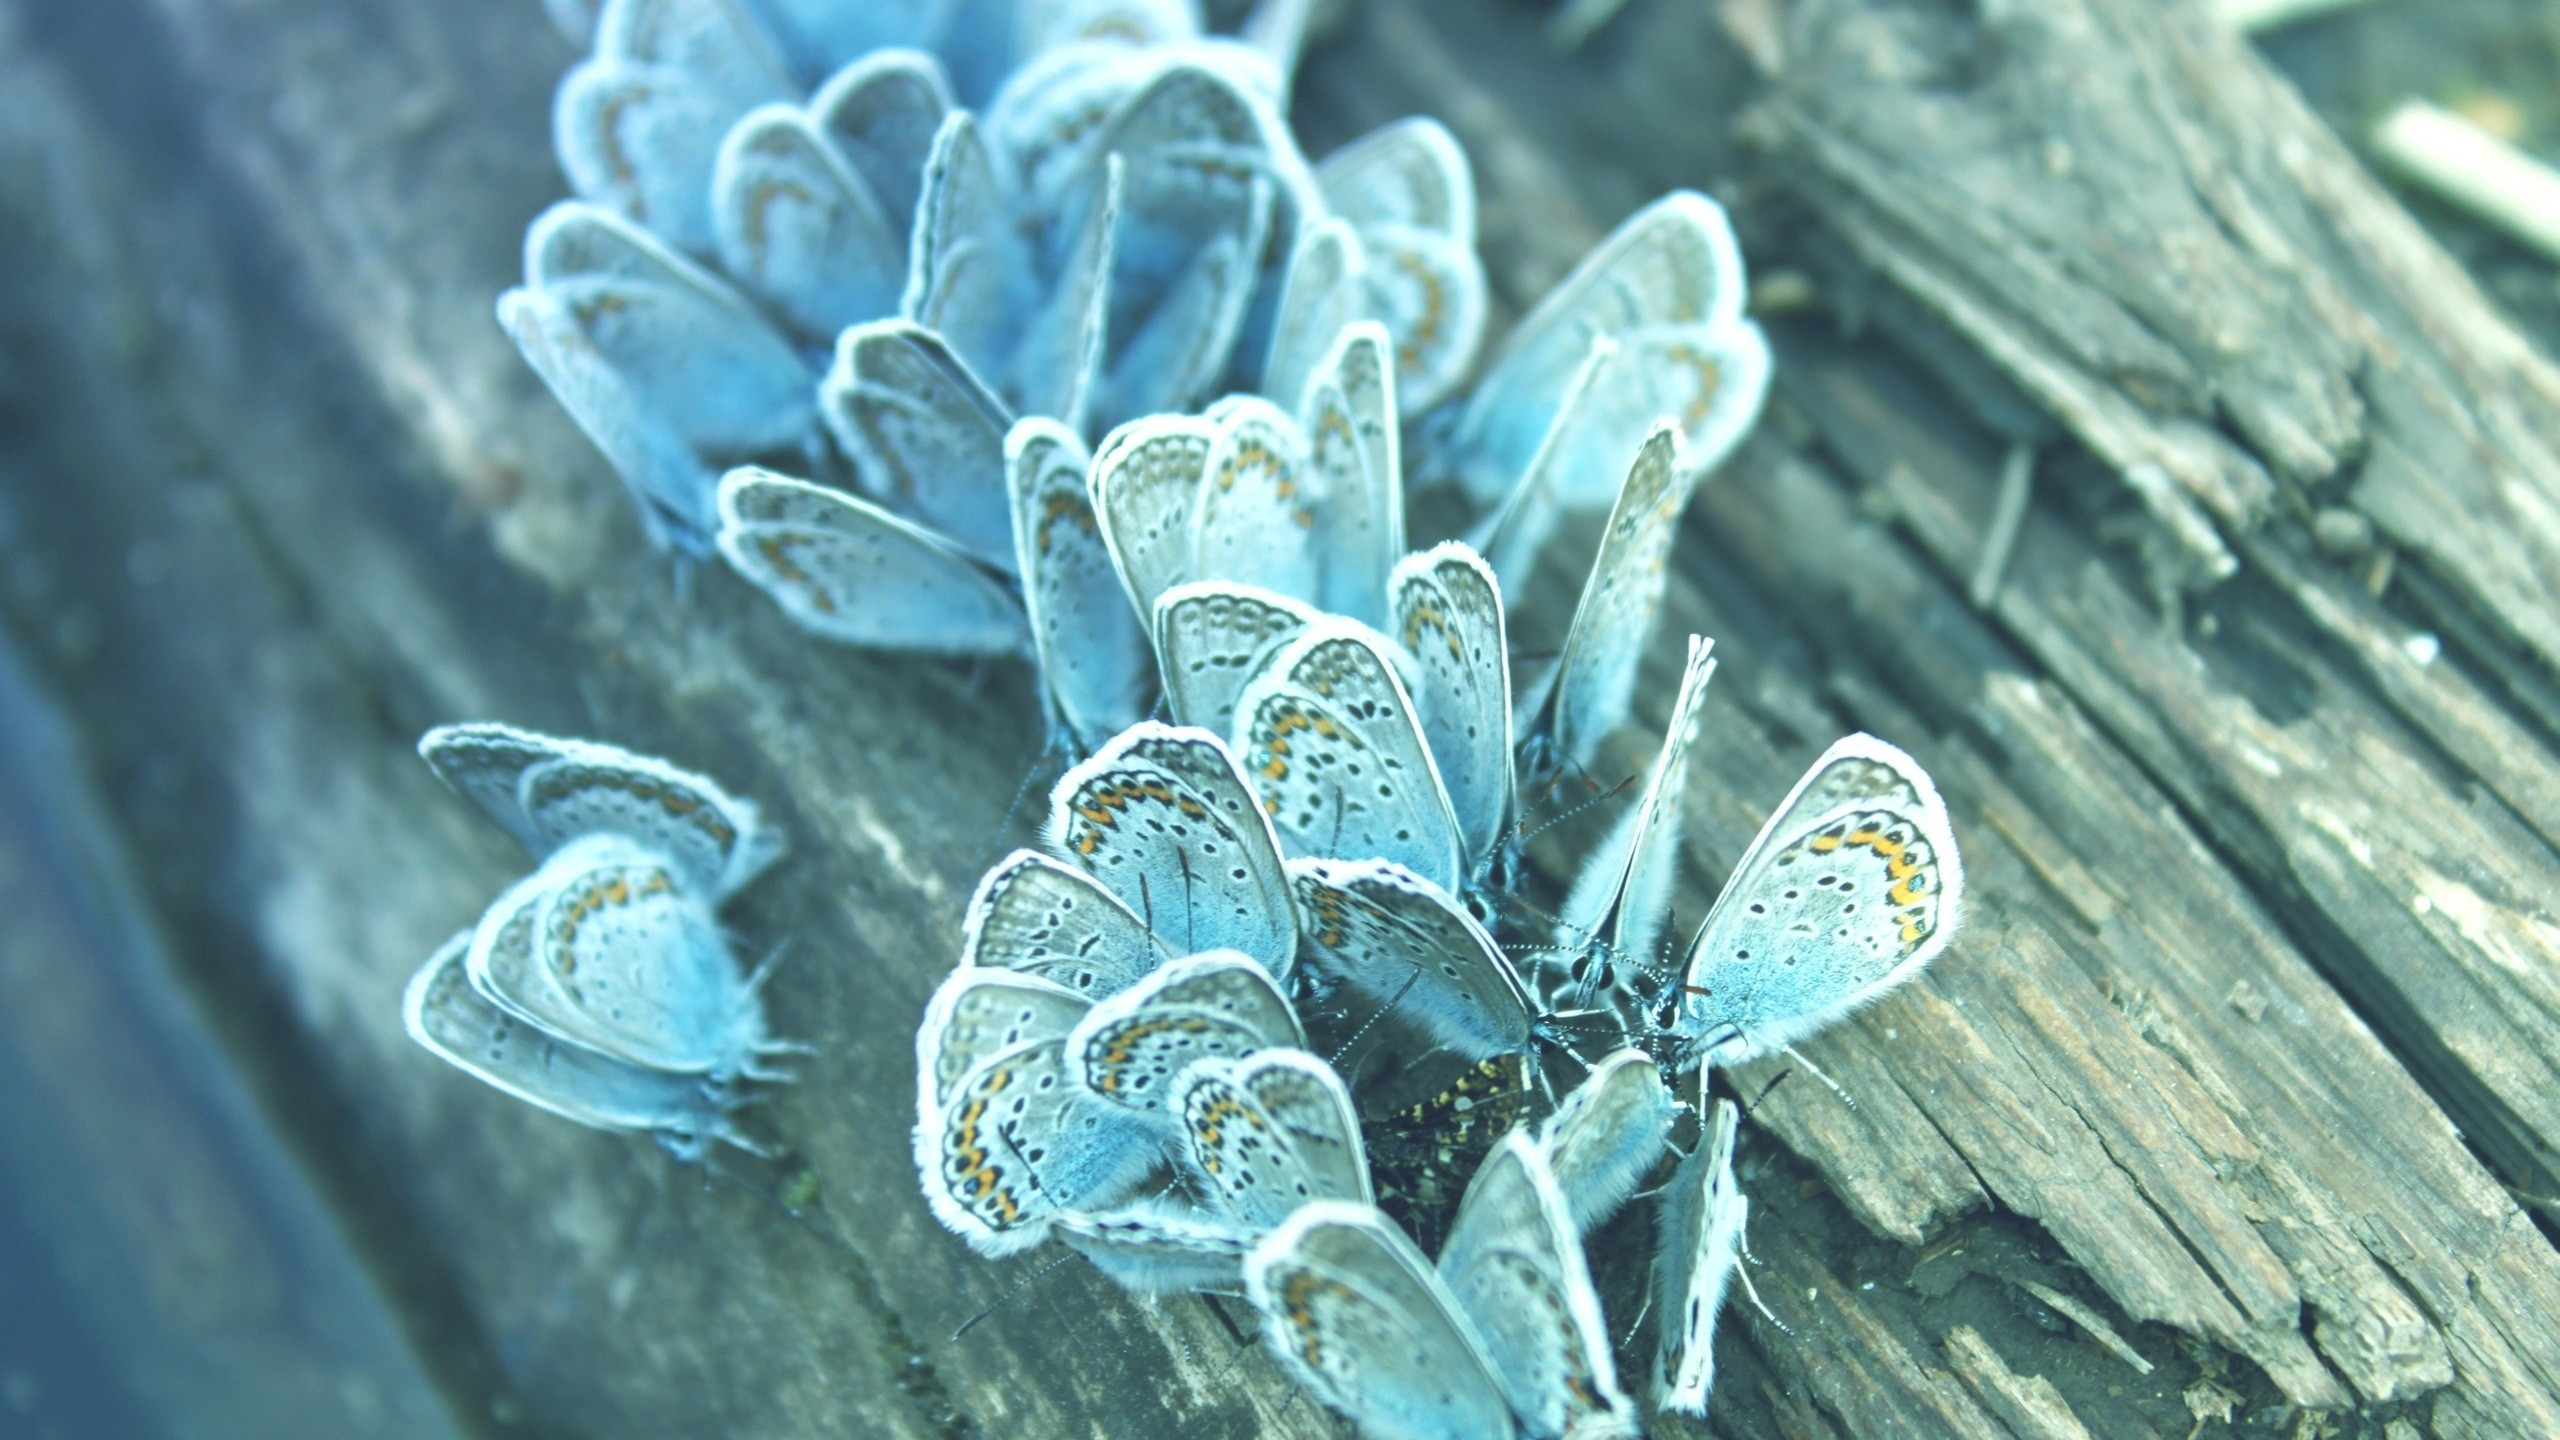 General 2560x1440 animals insect lepidoptera cyan closeup